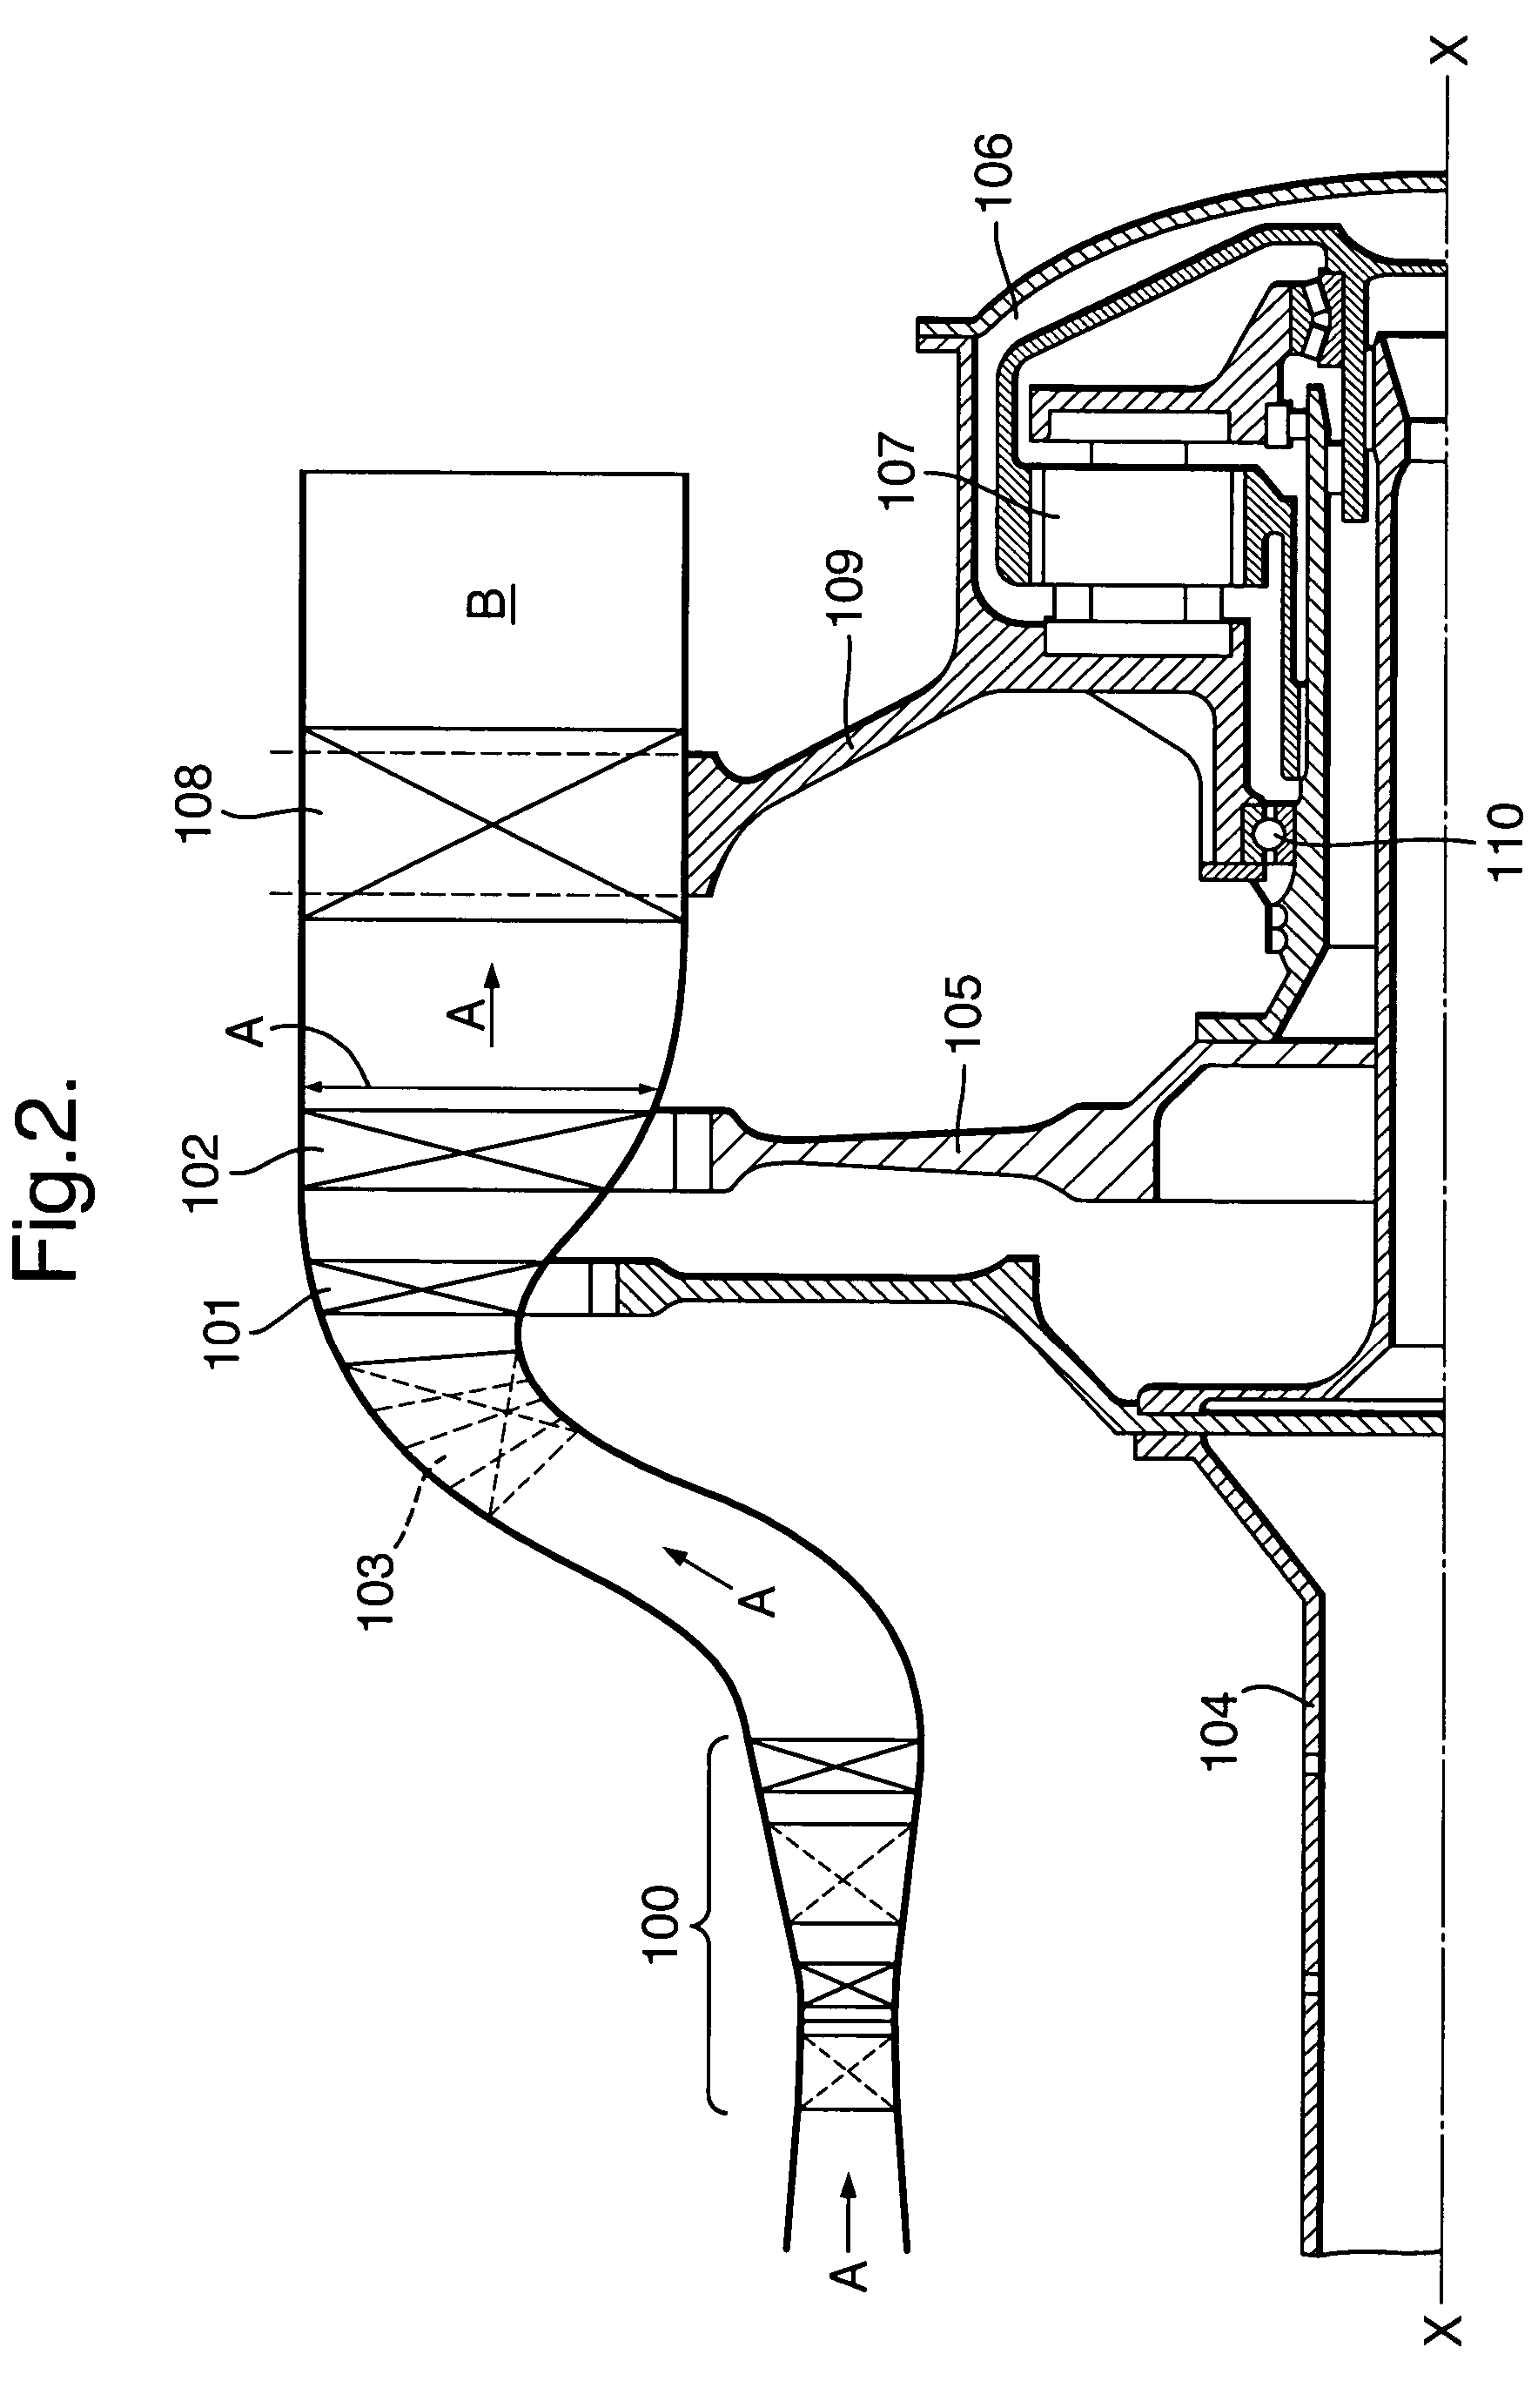 Counter-rotating turbine engine including a gearbox